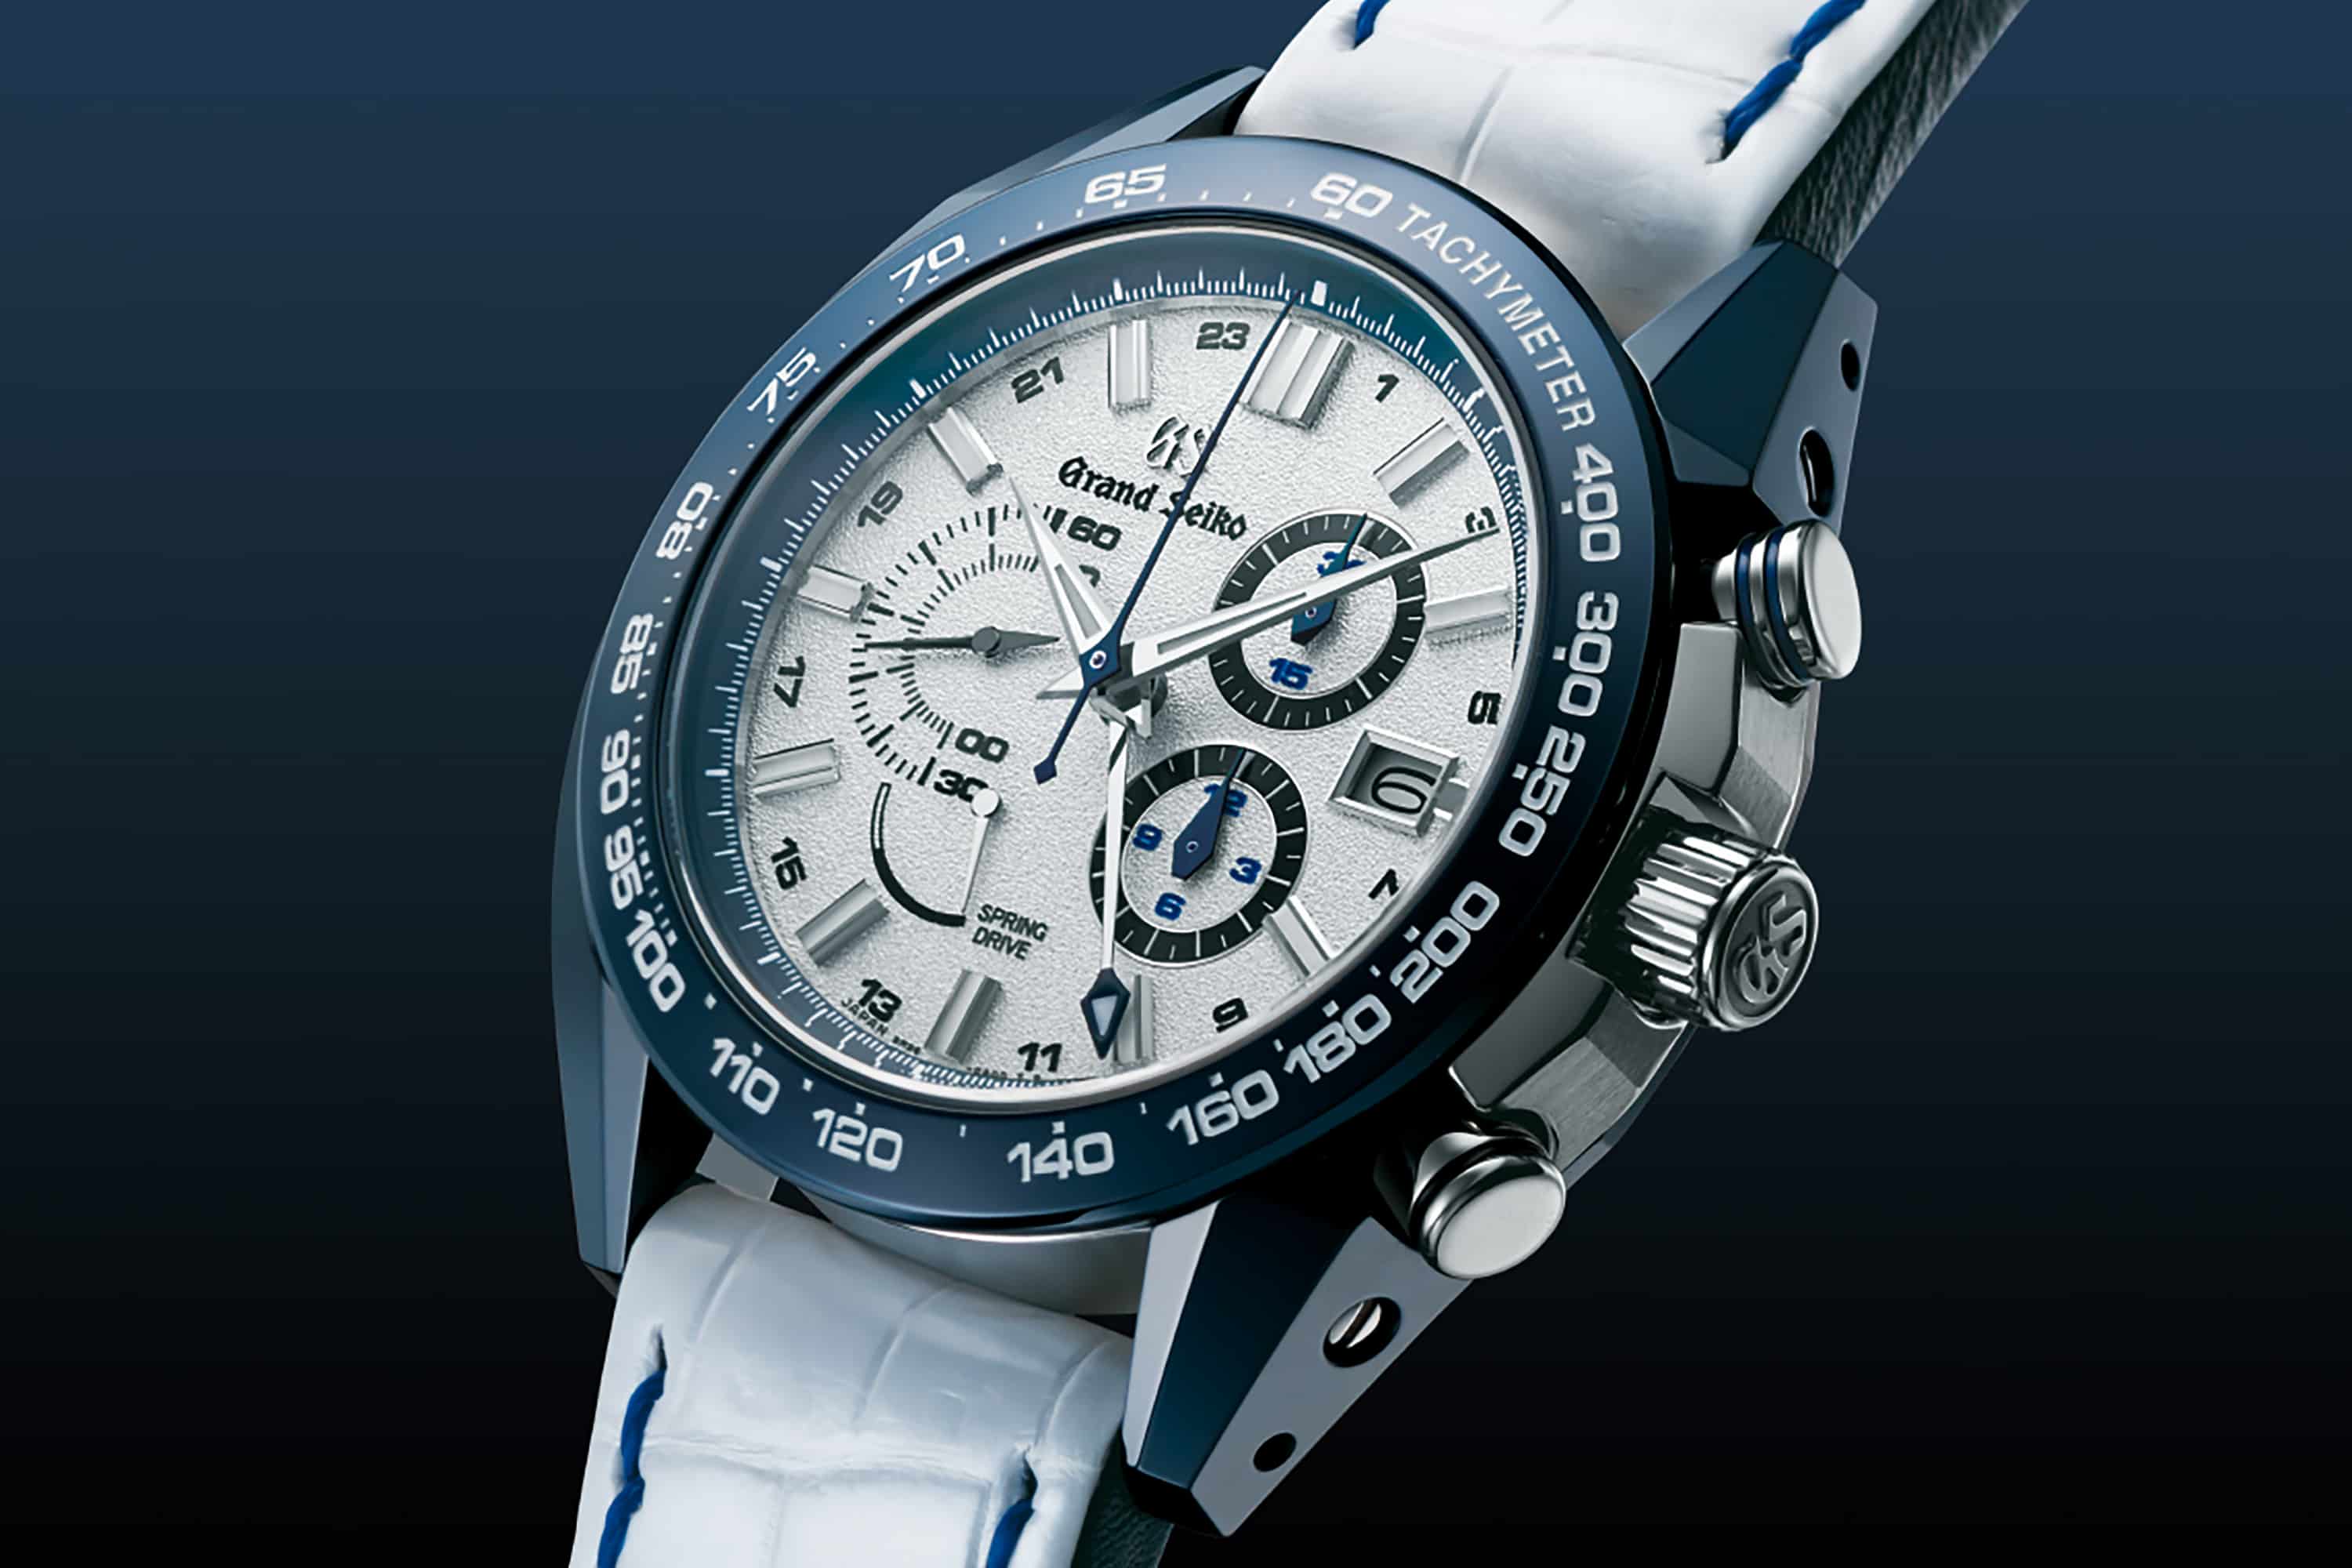 Introducing the Grand Seiko Spring Drive 20th & Nissan GT-R 50th  Anniversary Limited Edition Ref. SBGC229 - Worn & Wound